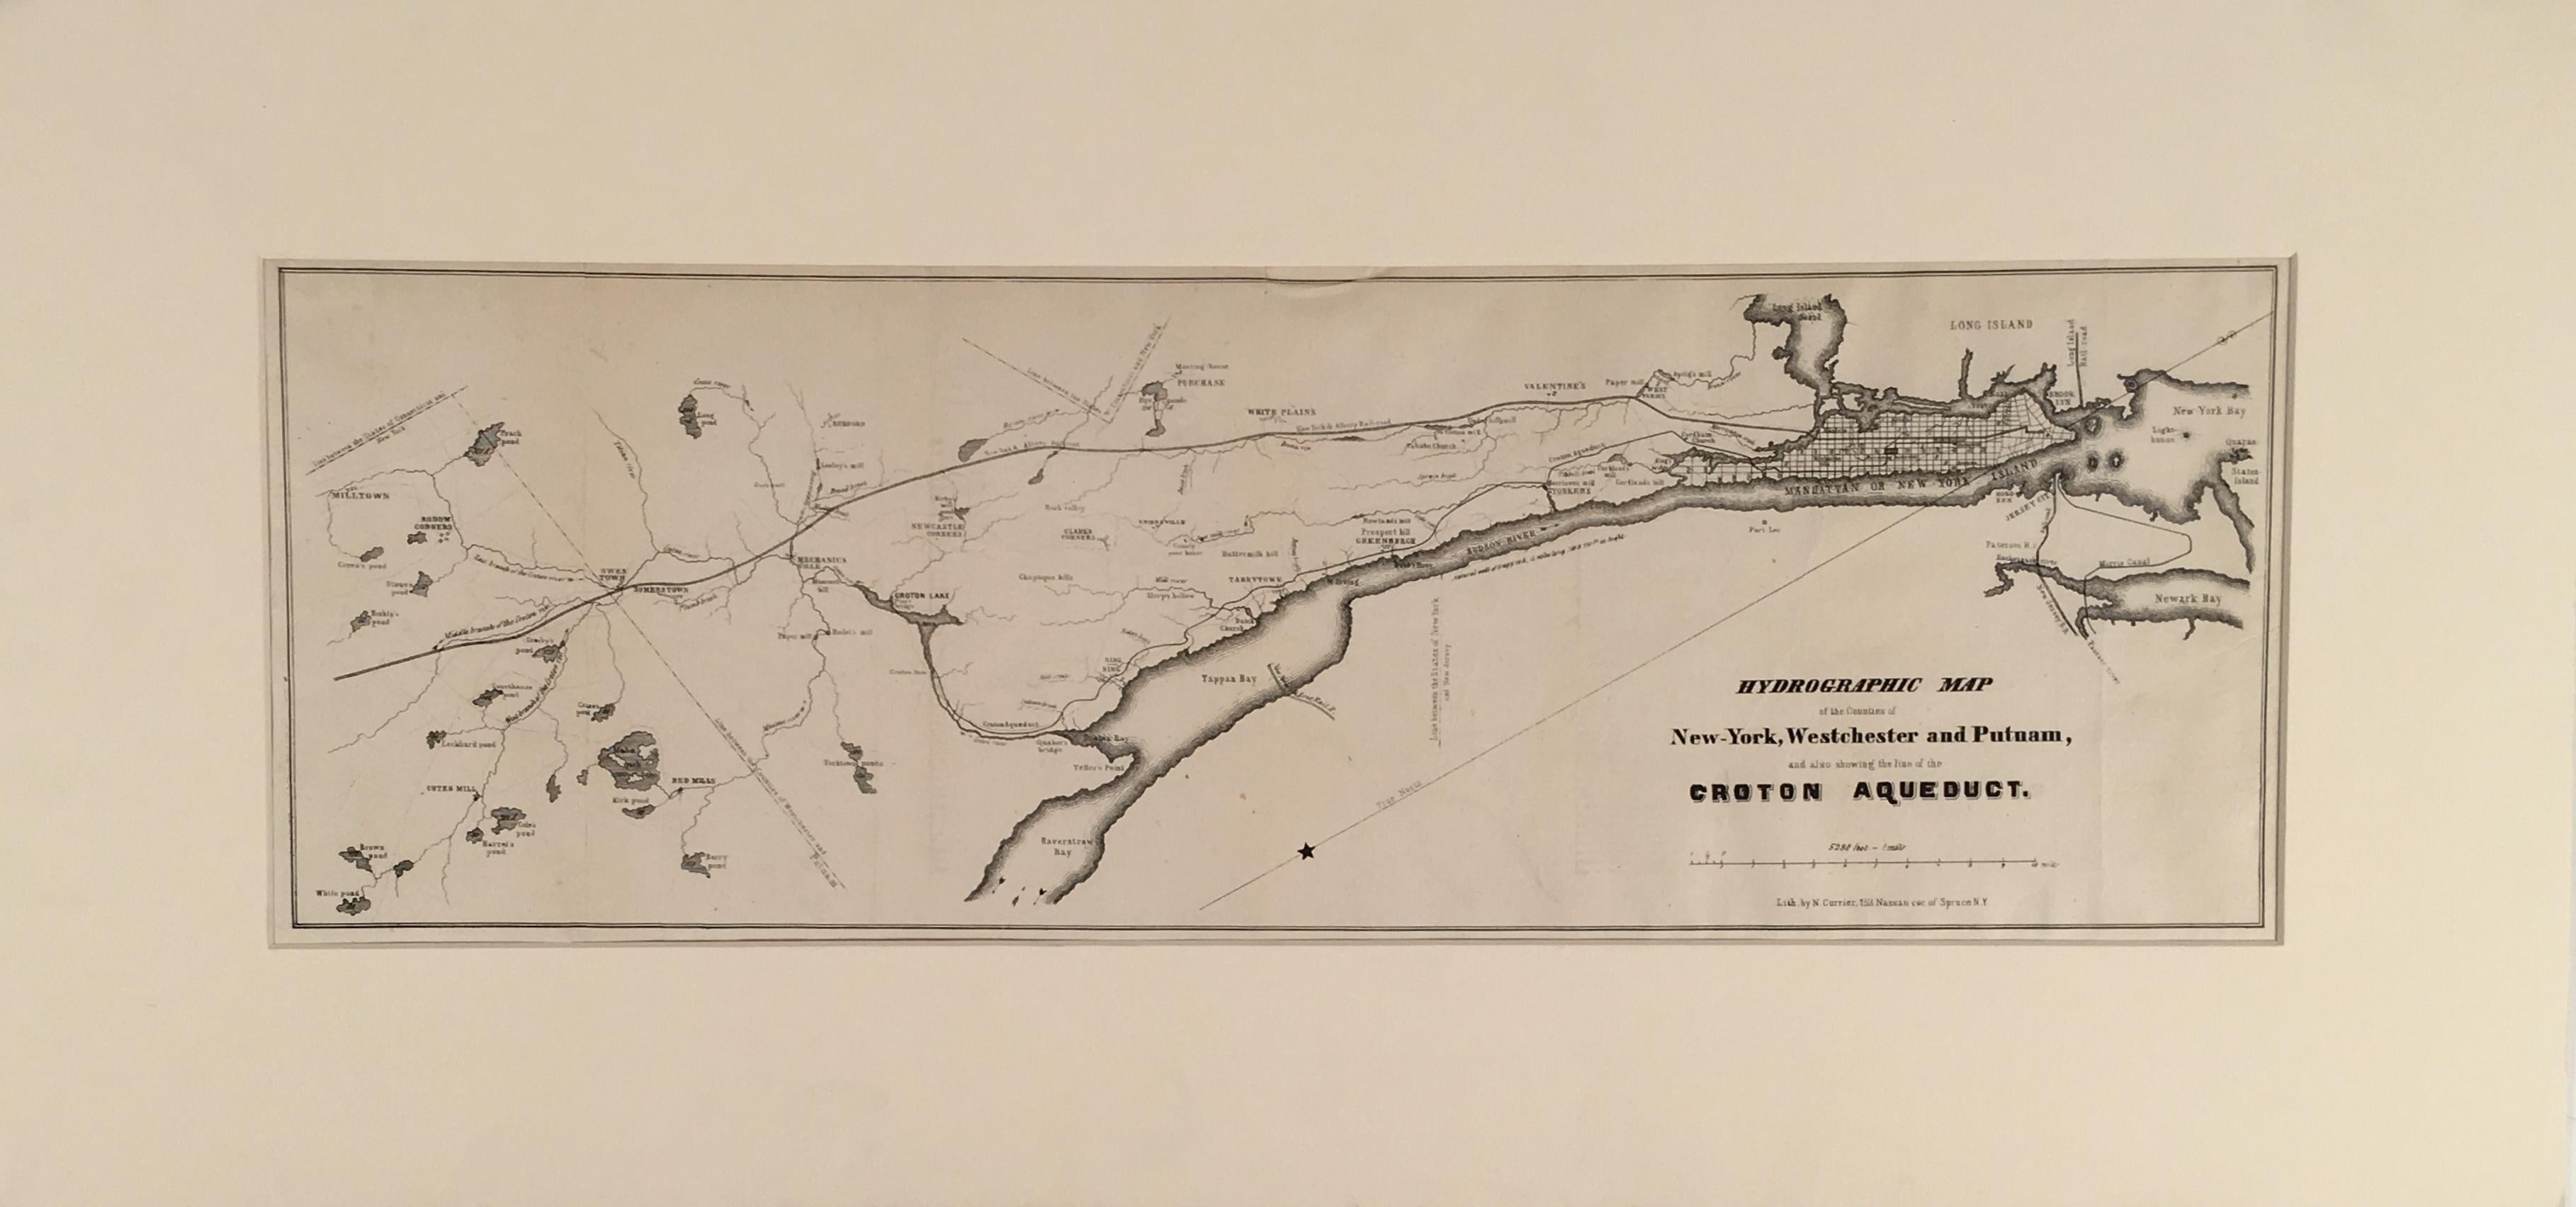 1911 WESTCHESTER HASTINGS NY CROTON AQUEDUCT G.W BROMLEY COPY ATLAS MAP 